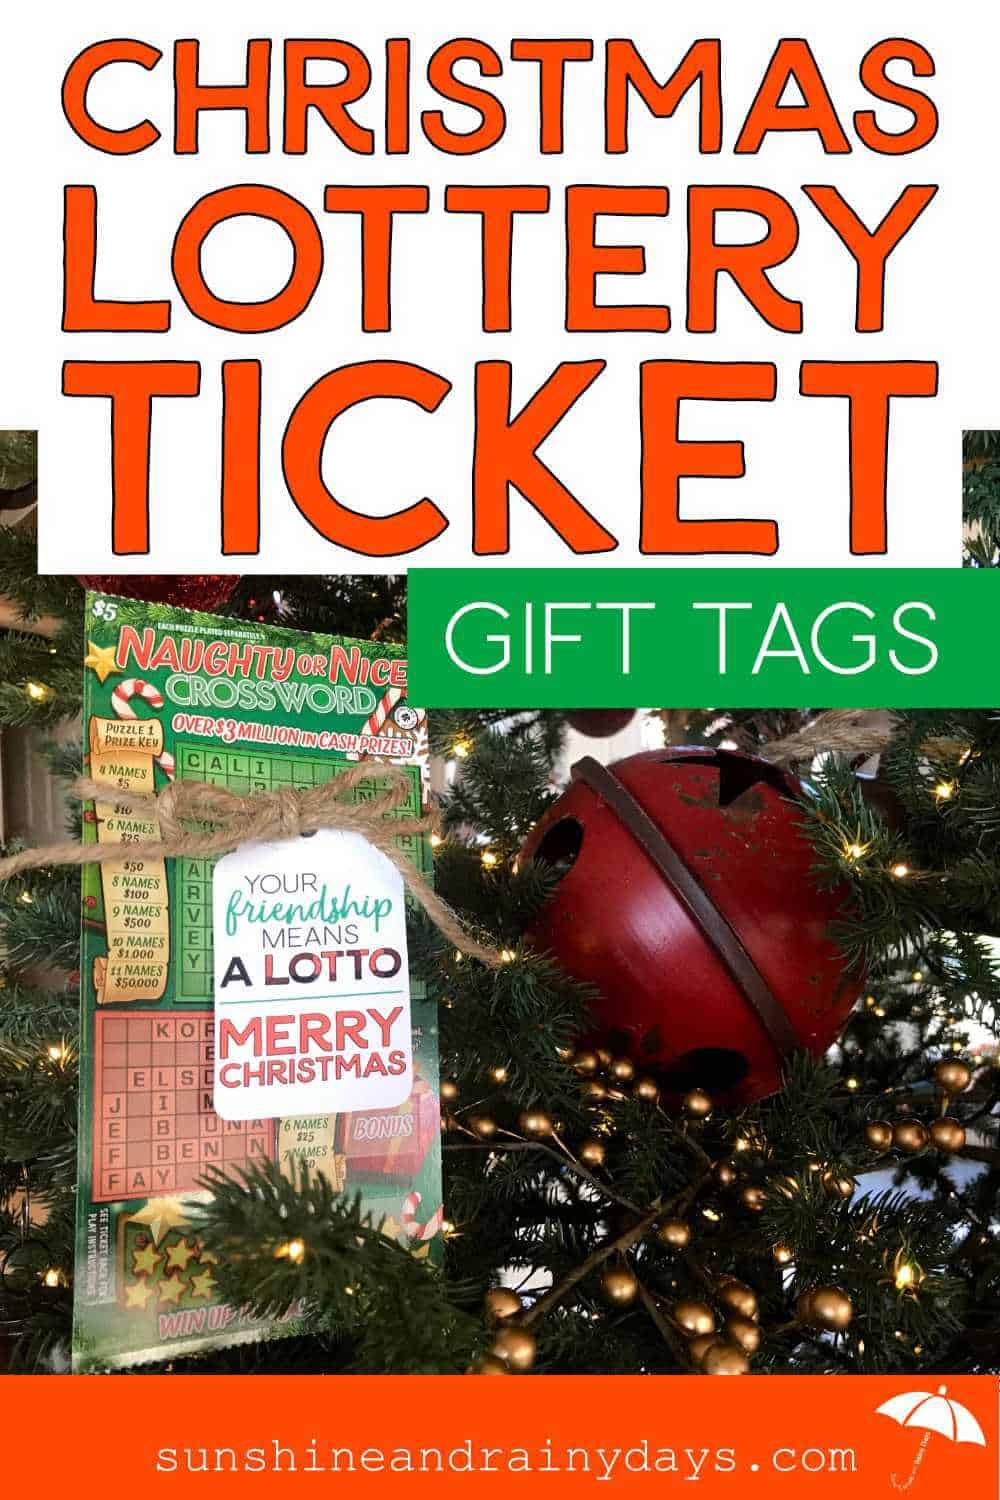 Christmas Lottery Ticket Gift Tags You Can Print At Home Sunshine and